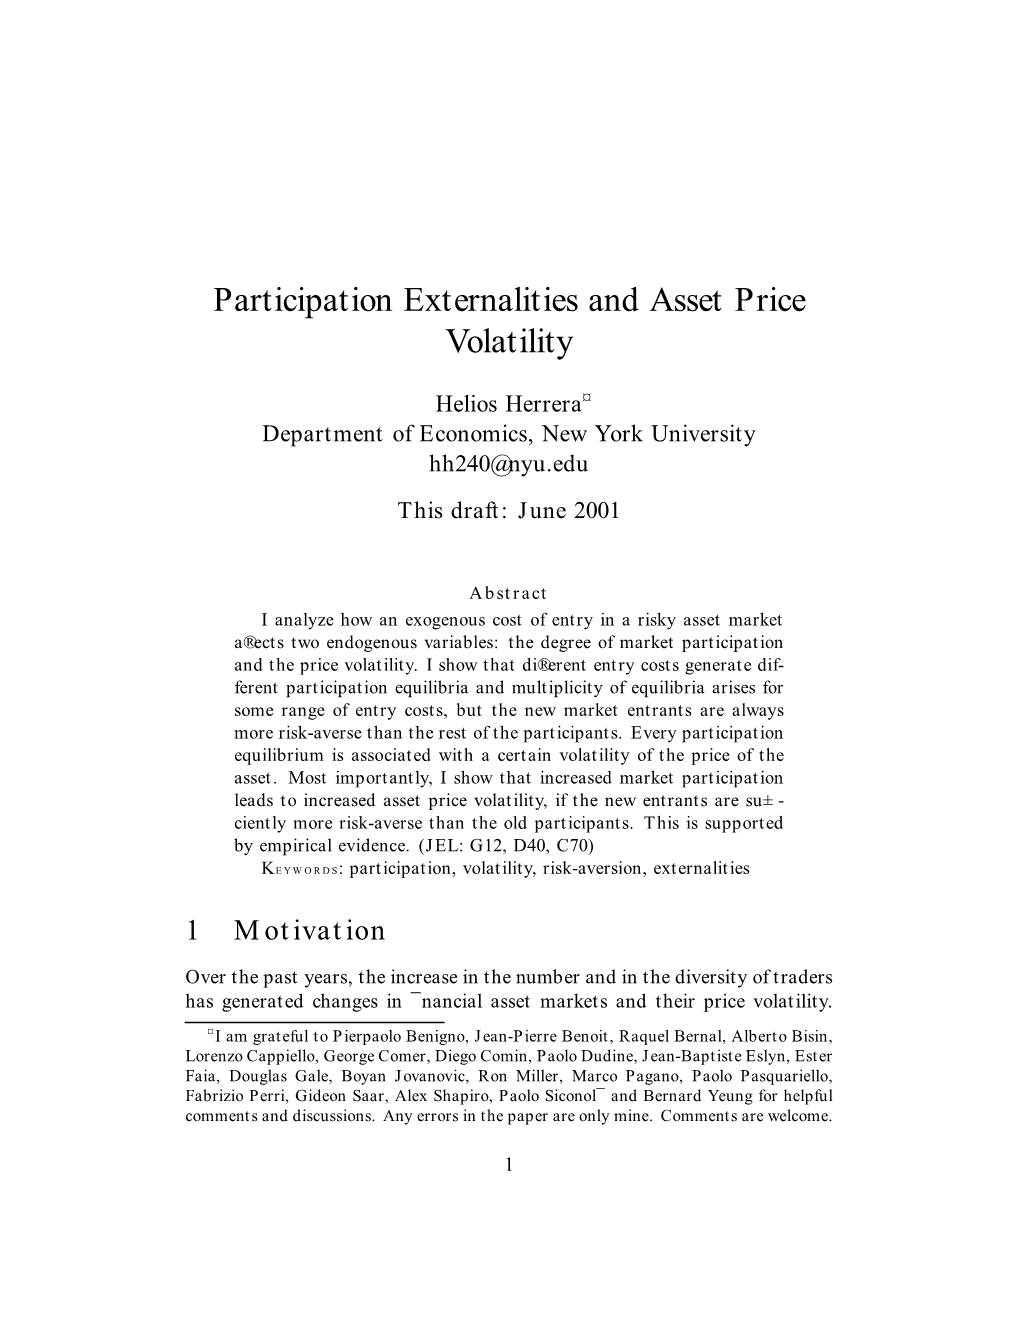 Participation Externalities and Asset Price Volatility